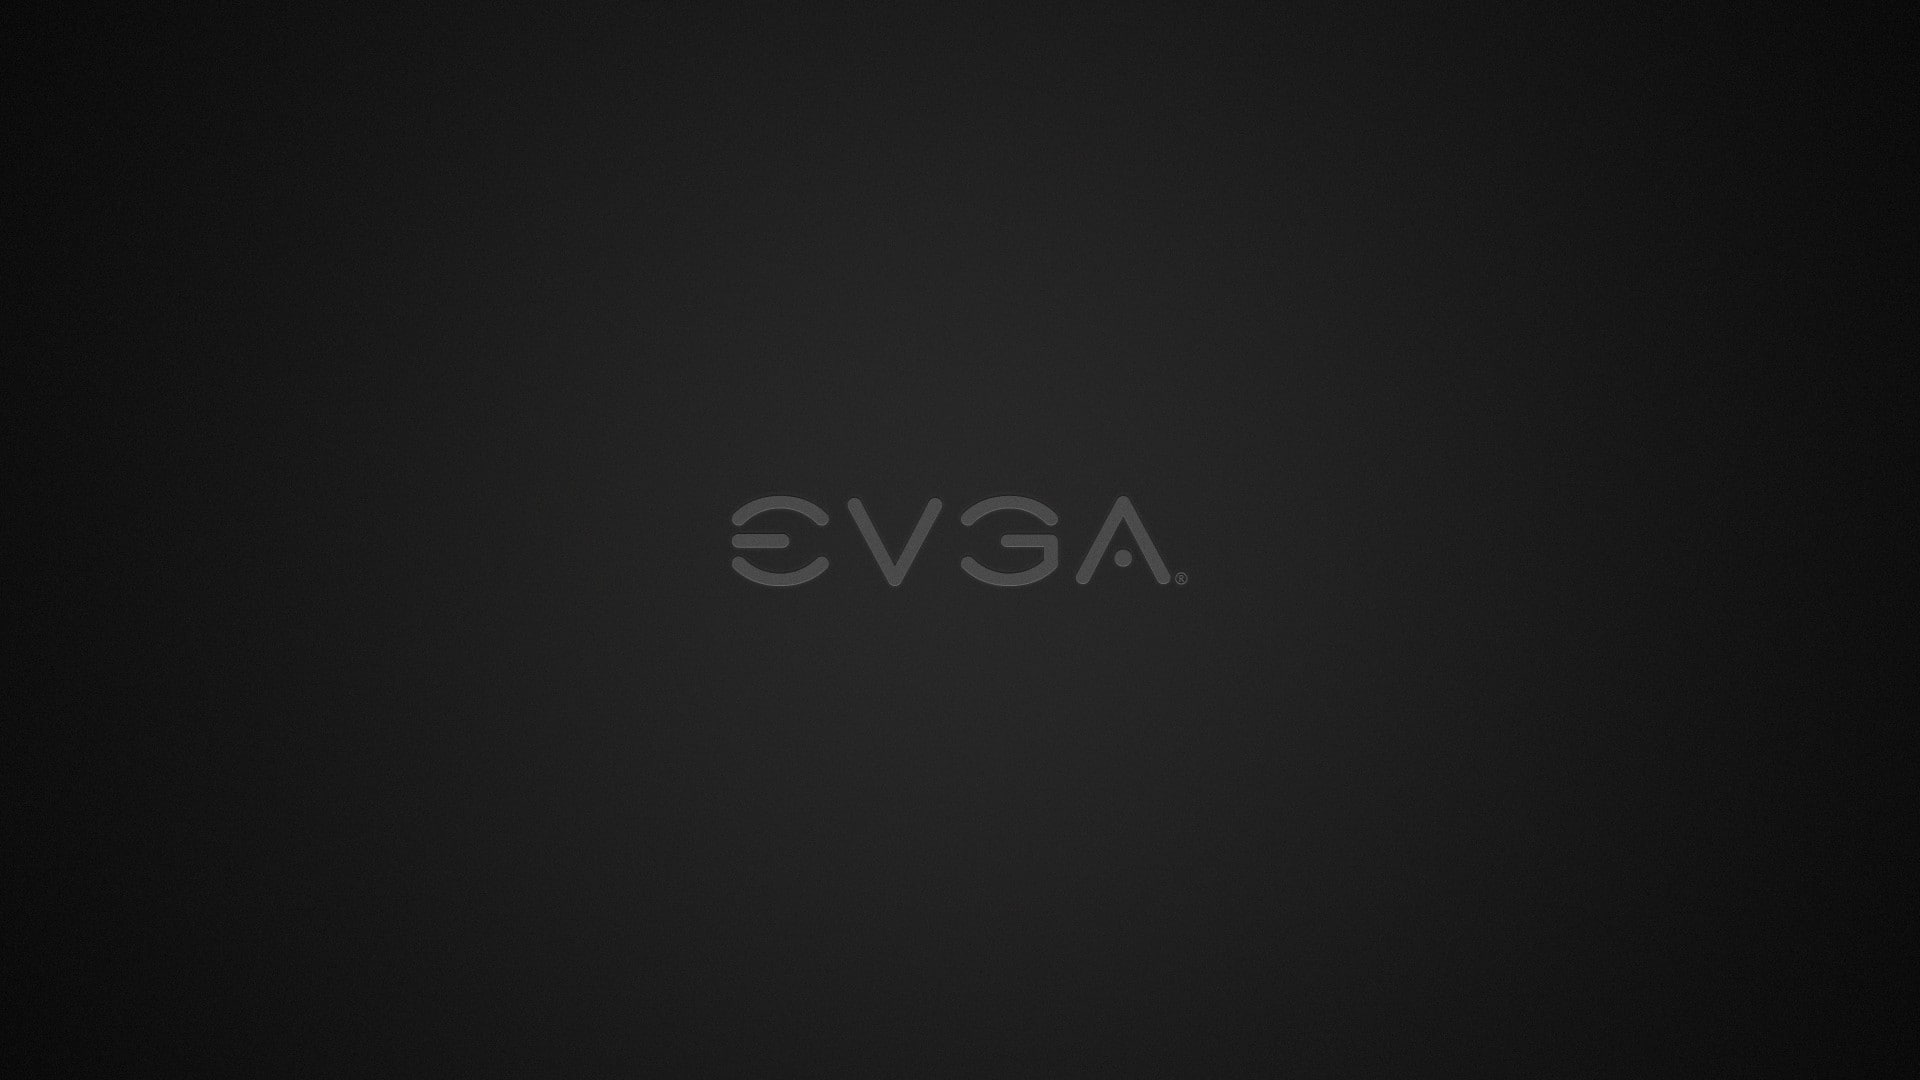 evga computer graphics card, text, black background, copy space